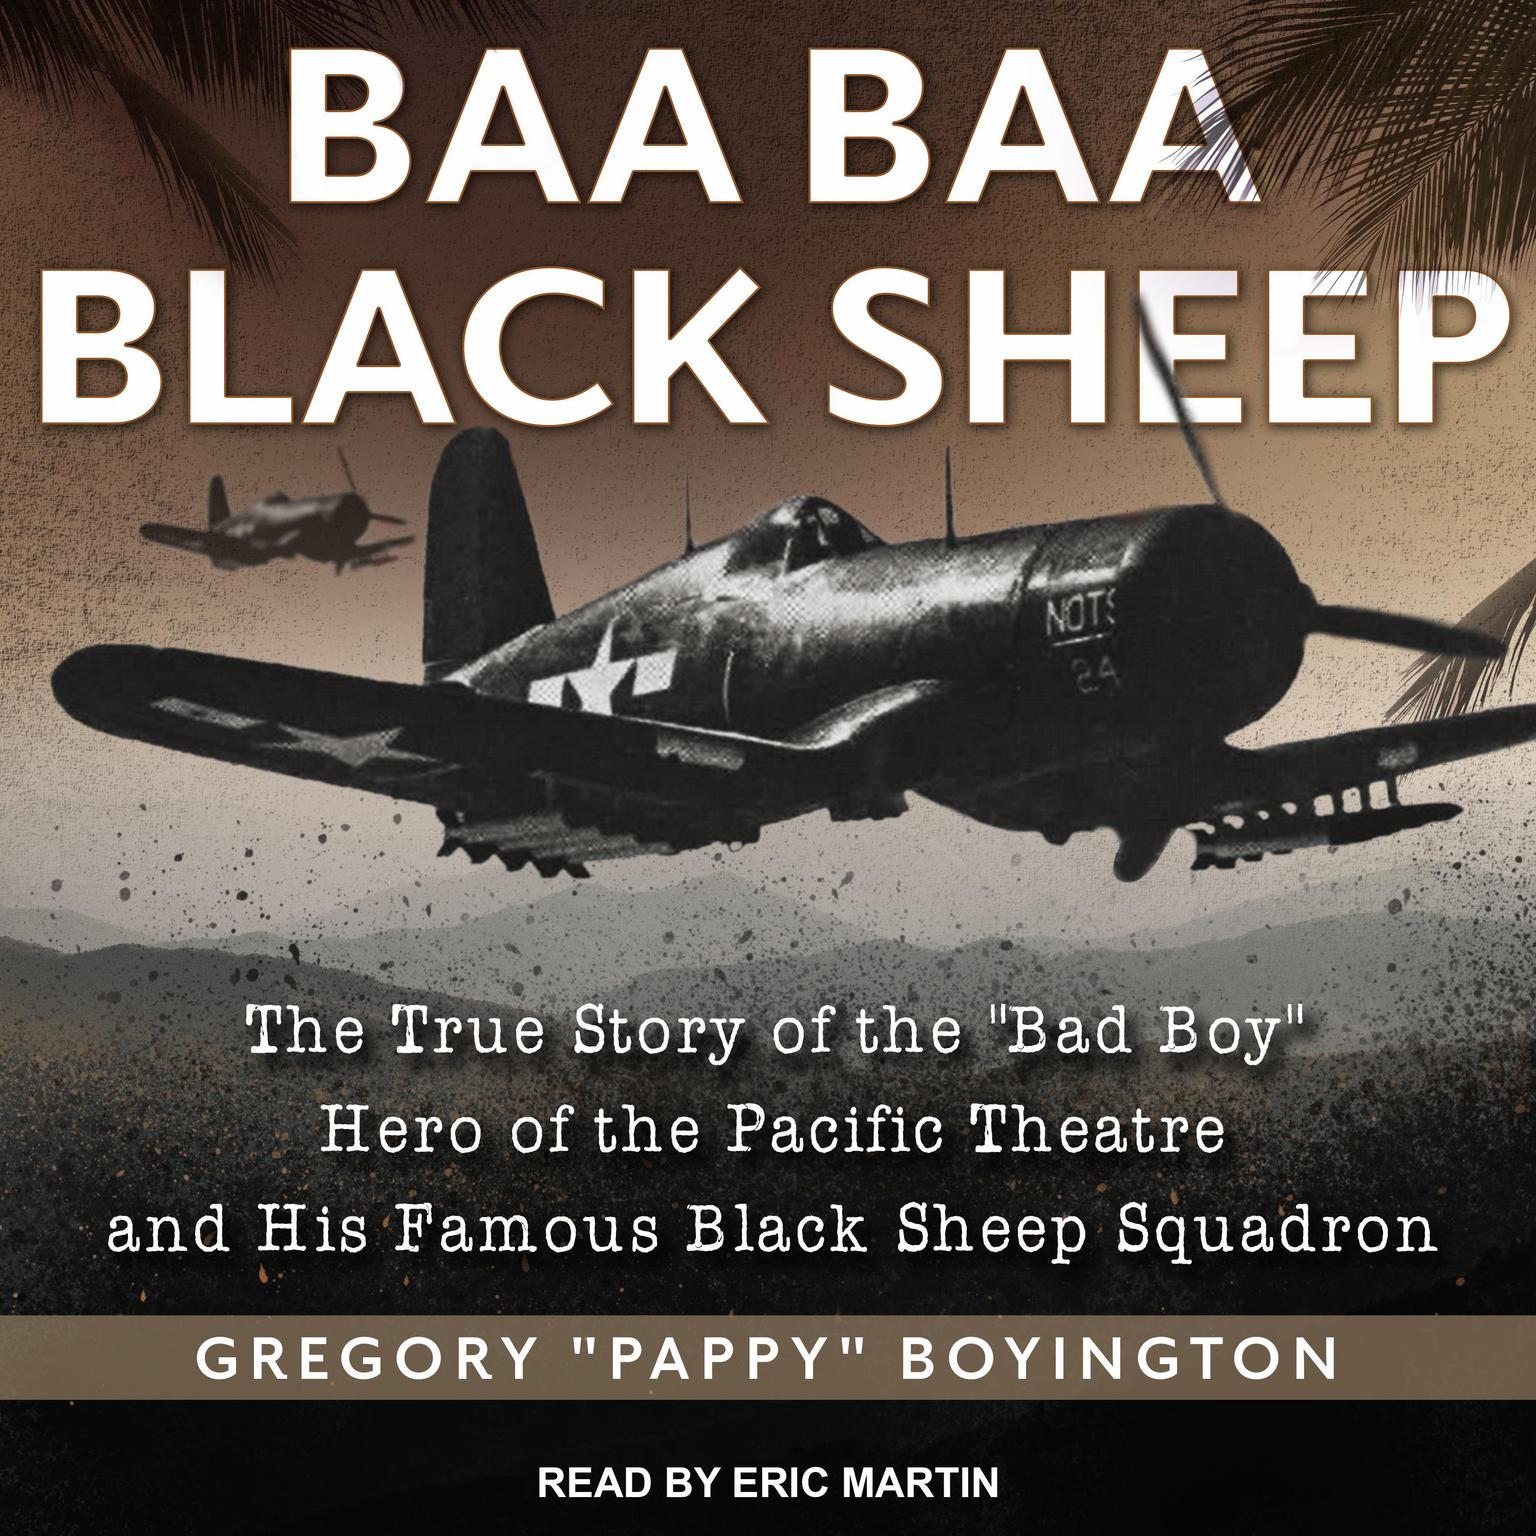 Baa Baa Black Sheep: The True Story of the Bad Boy Hero of the Pacific Theatre and His Famous Black Sheep Squadron Audiobook, by Gregory “Pappy” Boyington